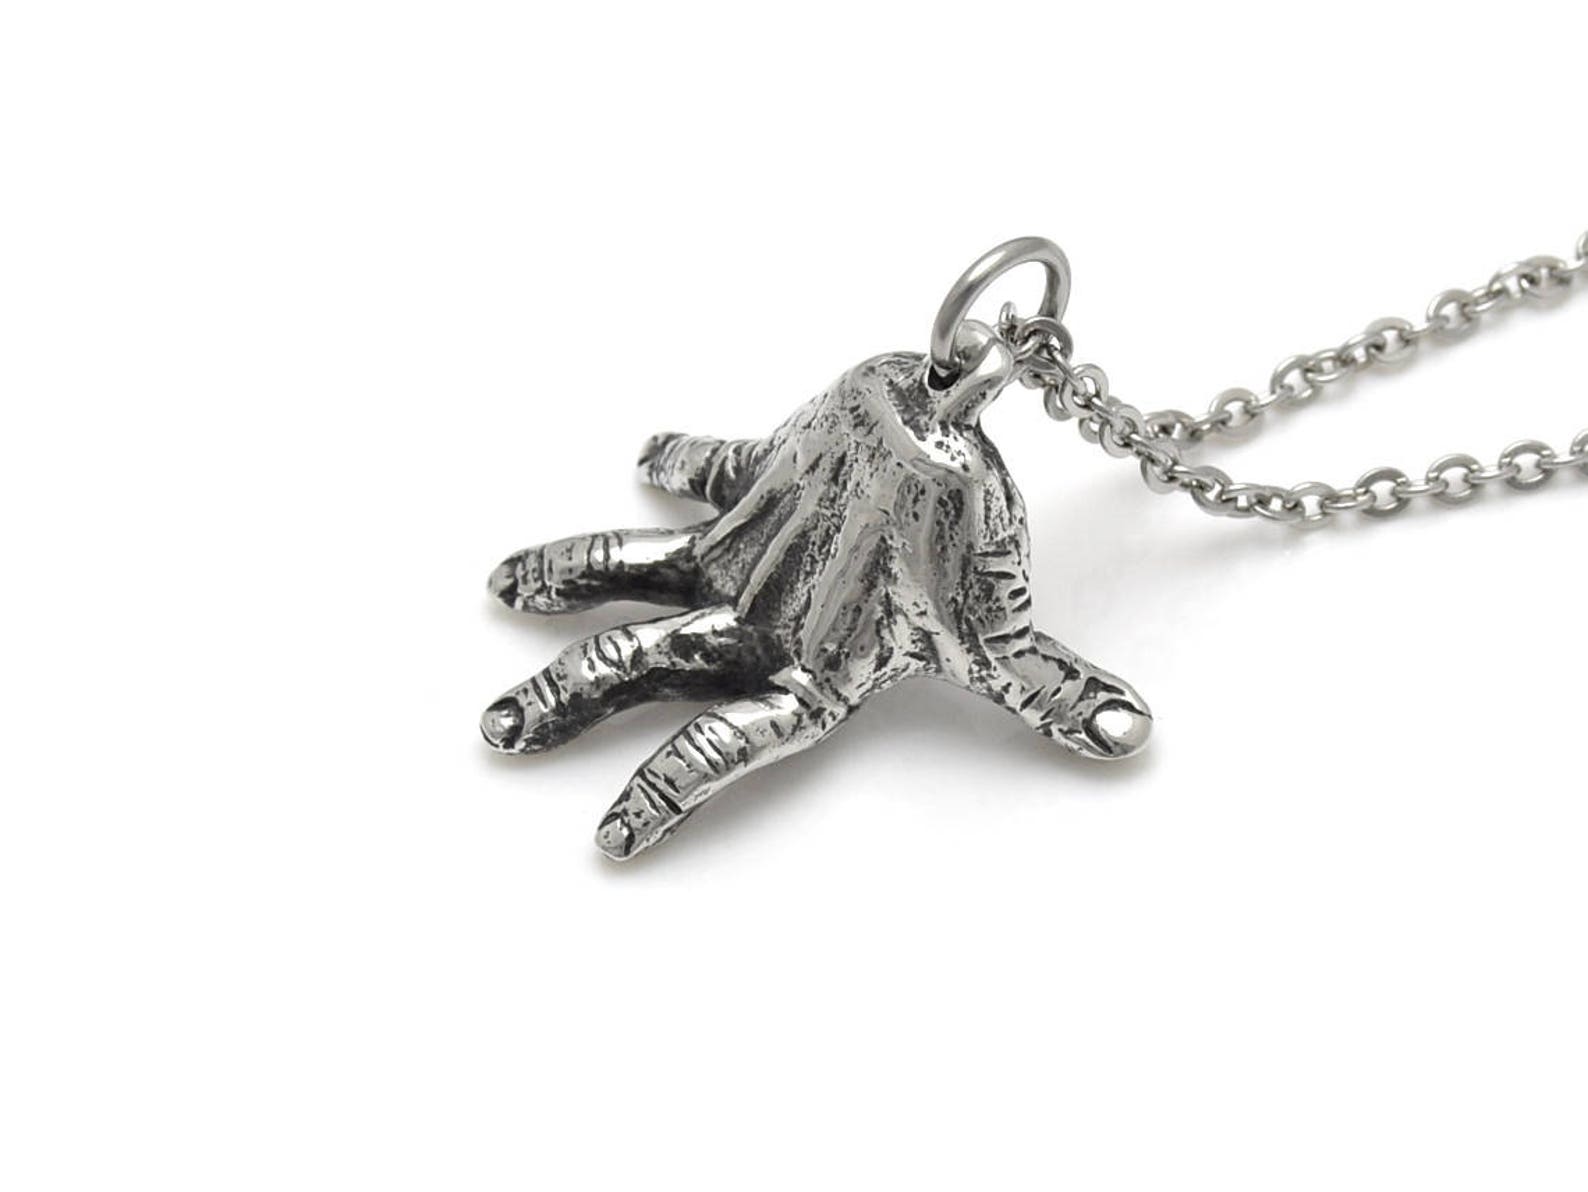 Human Hand Necklace in Pewter Anatomy Jewelry - Etsy